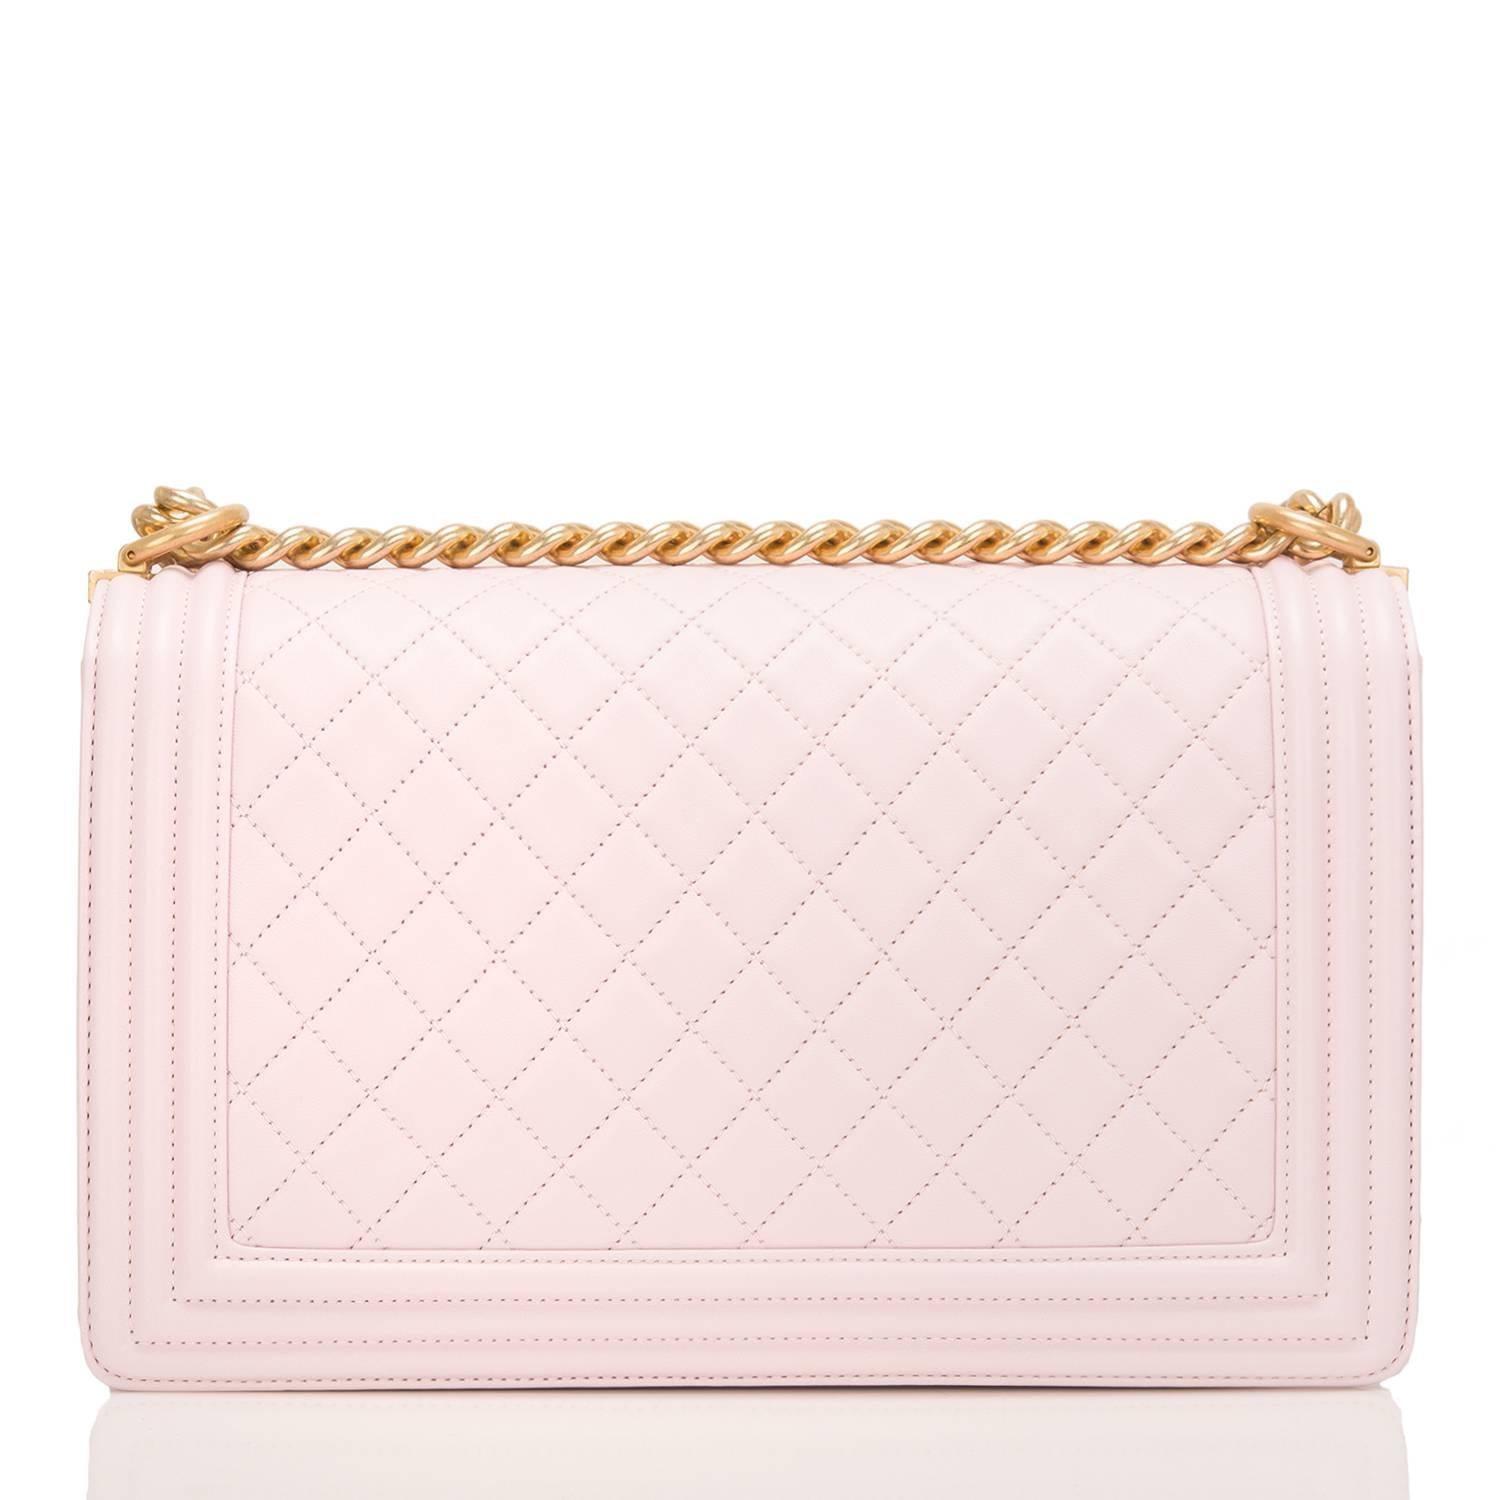 White Chanel Pink Quilted Lambskin New Medium Boy Bag